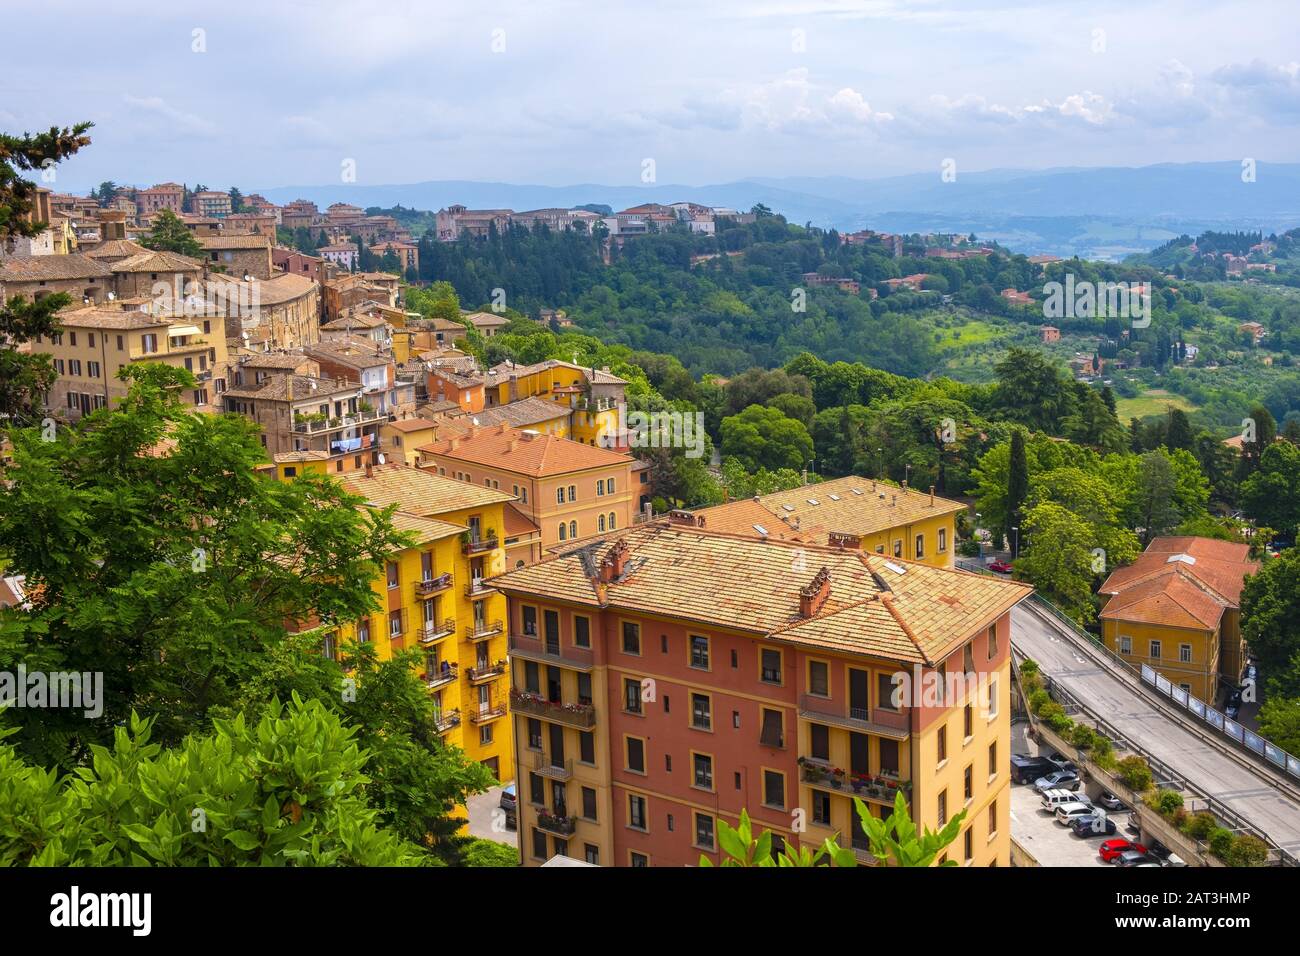 Perugia, Umbria / Italy - 2018/05/28: Panoramic view of the Perugia historic quarter with medieval houses and defense walls and surrounding Umbria region valleys Stock Photo